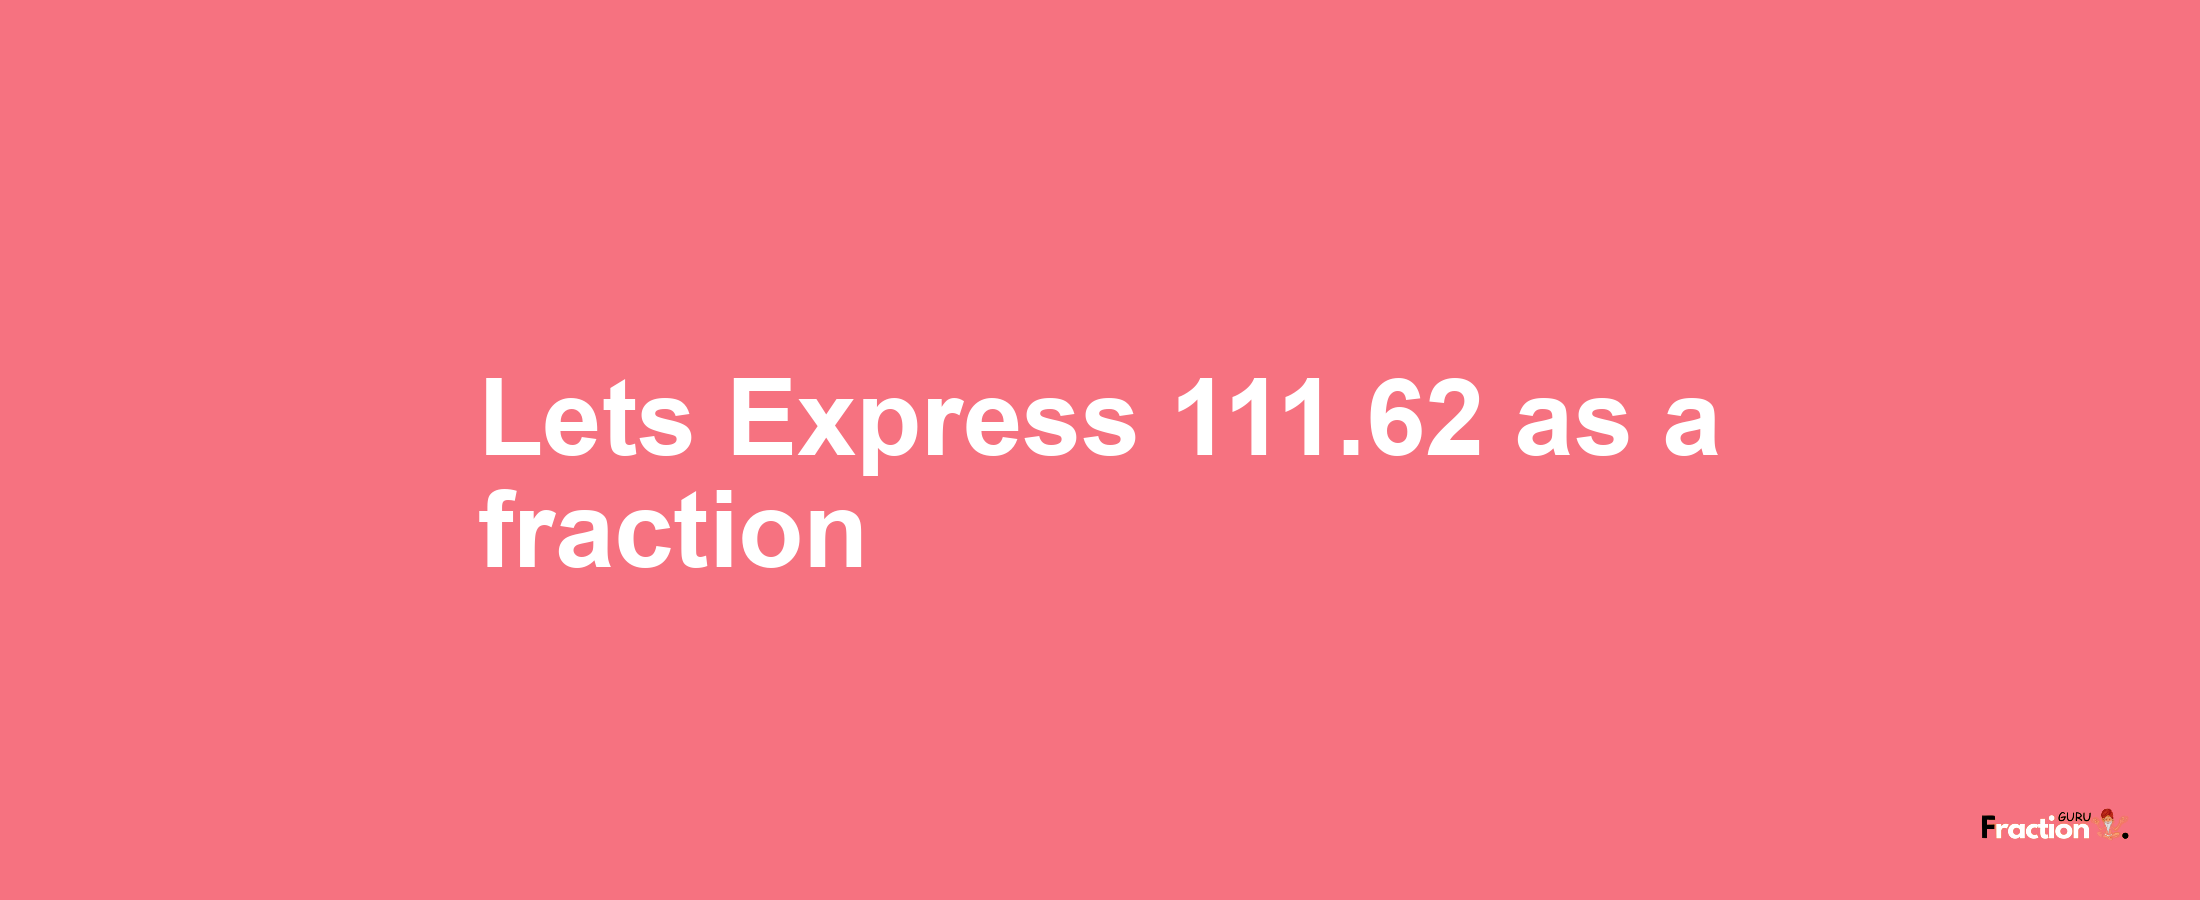 Lets Express 111.62 as afraction